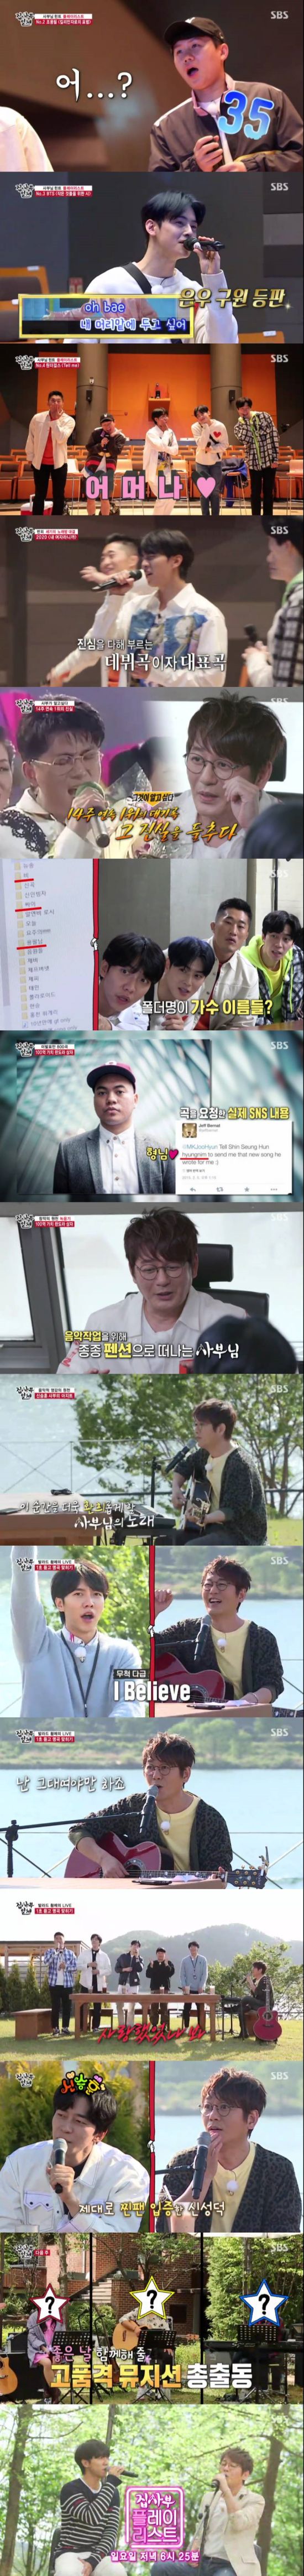 All The Butlers ballad emperor Shin Seung Hun gave memories and healing with a sensational Healing Song Camp.SBS All The Butlers, which was broadcast on the 17th, drew a rising curve with 6.1% of household TV viewer ratings, and 2049 target TV viewer ratings, which are important indicators of the people concerned and lead the topic, at 3.5% (based on the second part of the metropolitan area), and the highest TV viewer ratings per minute rose to 7.3%.(Nilson Korea)Only one of the five ice boxes contains a preparation for the members, the production team told Lee Seung-gi, Yang Se-hyeong, Shin Sung-rok, Jung Eun-woo and Kim Dong-Hyun, who gathered to meet the master, and the masters preparations for the members are included. I gave you a surprise mission.The production team also said that they selected songs related to the master, and Shin Sung-rok, Yang Se-hyeong, Kim Dong-Hyun and Jung Eun-woo raised the atmosphere by singing Seo Taiji and the childrens I know, Cho Yong-pils Chilimanjaros leopard and BTSs Poetry for Small Things.On the other hand, Lee Seung-gi captivated the ears of those who watched his debut song My Girl in a unique appealing voice for the confrontation with Yang Se-hyeong who had a team dinner.The production team said, The songs that have been sung so far are the longest songs in the history of Korean popular songs.Todays master was listed in the Guinness Book of Records for 14 weeks, he said, Seven consecutive albums that are hard to see in the World , and Lee Seung-gi and Shin Sung-rok seemed to have noticed the master.The master of the day, which I met in the recording studio, was the legendary ballad emperor Shin Seung Hun, who expressed his gratitude, saying, I told you that I wanted to take you from last year.Shin Seung Hun then performed the song Invisible Love, which was ranked # 1 for 14 consecutive weeks, with an impromptu piano performance and Love Live!The members of Shin Seung Huns impromptu Love Live! were very enthusiastic, and Shin Seung Hun said, Is this enough?There are many other hits, and it will be fun today.On the other hand, Shin Seung Hun said, I wrote it myself, but it does not fit me.I saved a singer who seemed to fit more with a folder name. From Jeff Bridges Burnett to World Star Rain and Psy, and Cho Yong-pil, I opened up the composition folders stored in the name of the amazing Lee Su-hyun.In fact, Shin Seung Hun surprised the members by knowing that he wrote a song by World R & B Lee Su-hyun Jeff Bridges Burnett.Shin Seung Hun later guided the members to his azit, saying, When I write a song, I leave for the pension. If I have a thrill in a new place, the song will come out well.There, in the background of beautiful natural scenery, Shin Seung Hun gave healing by singing for the five members.Then, the game of Listening for 1 Second and Hitting Shin Seung Huns famous song was played.The members continued to answer the correct answer, and Shin Seung Hun gave a time to charge the emotions by singing memorable songs with a sweet voice.The members also sang Shin Seung Huns famous songs together and filled the Camp.At the end of the broadcast, a healing concert with high-quality Lee Su-hyun was released, raising expectations for next weeks broadcast.Photo: SBS broadcast screen